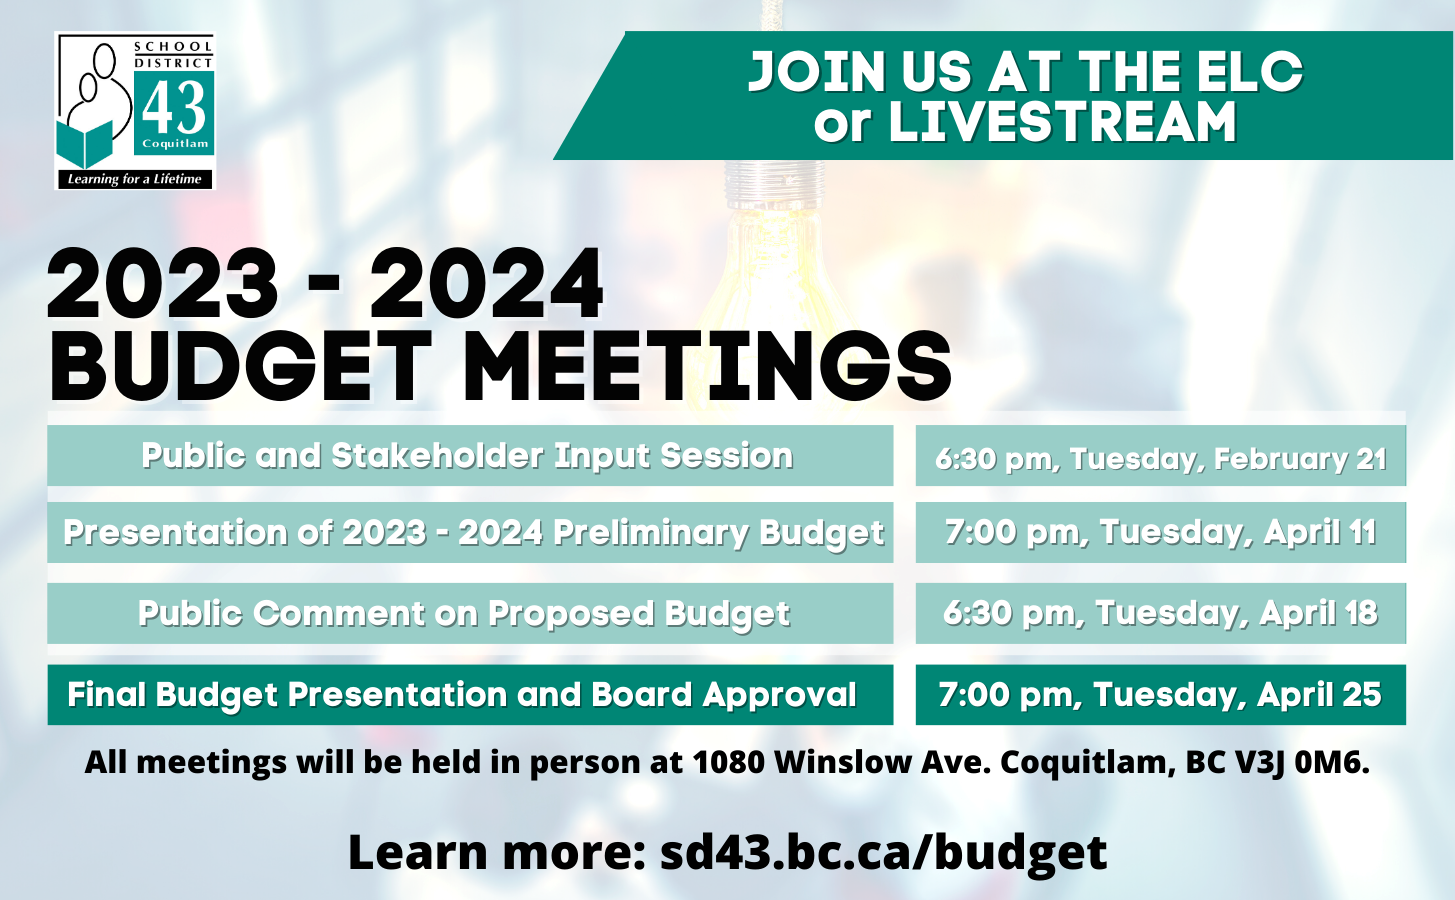 Attend our next budget meeting on April 11 at 7 pm